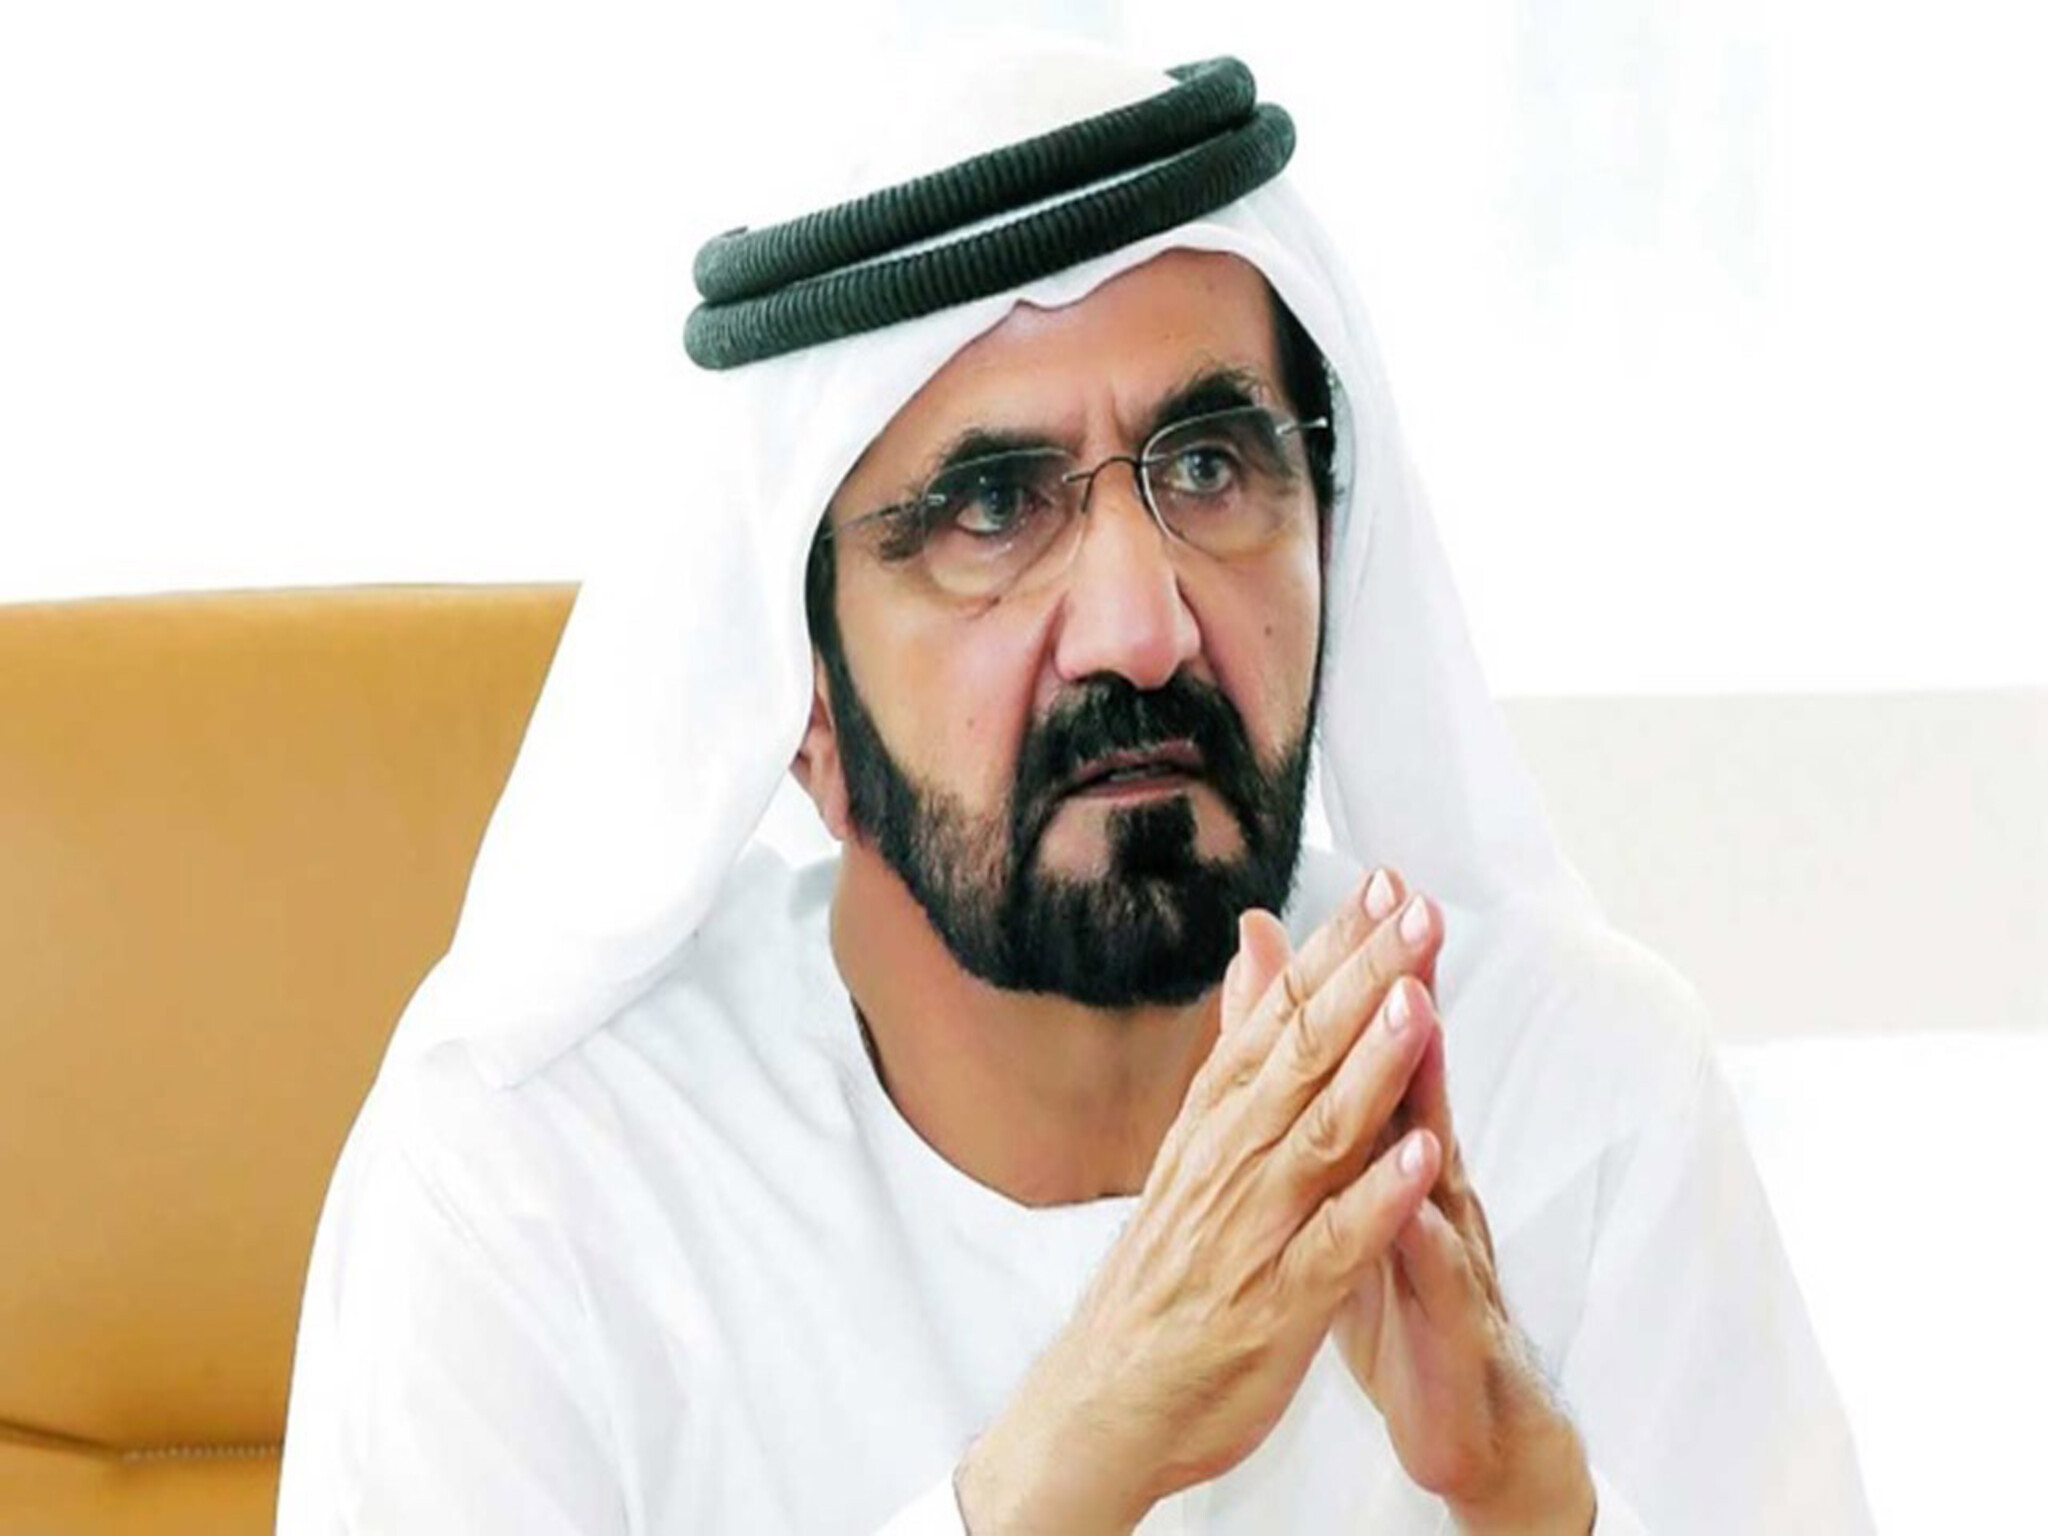 The UAE announces a new initiative to create hundreds of jobs annually